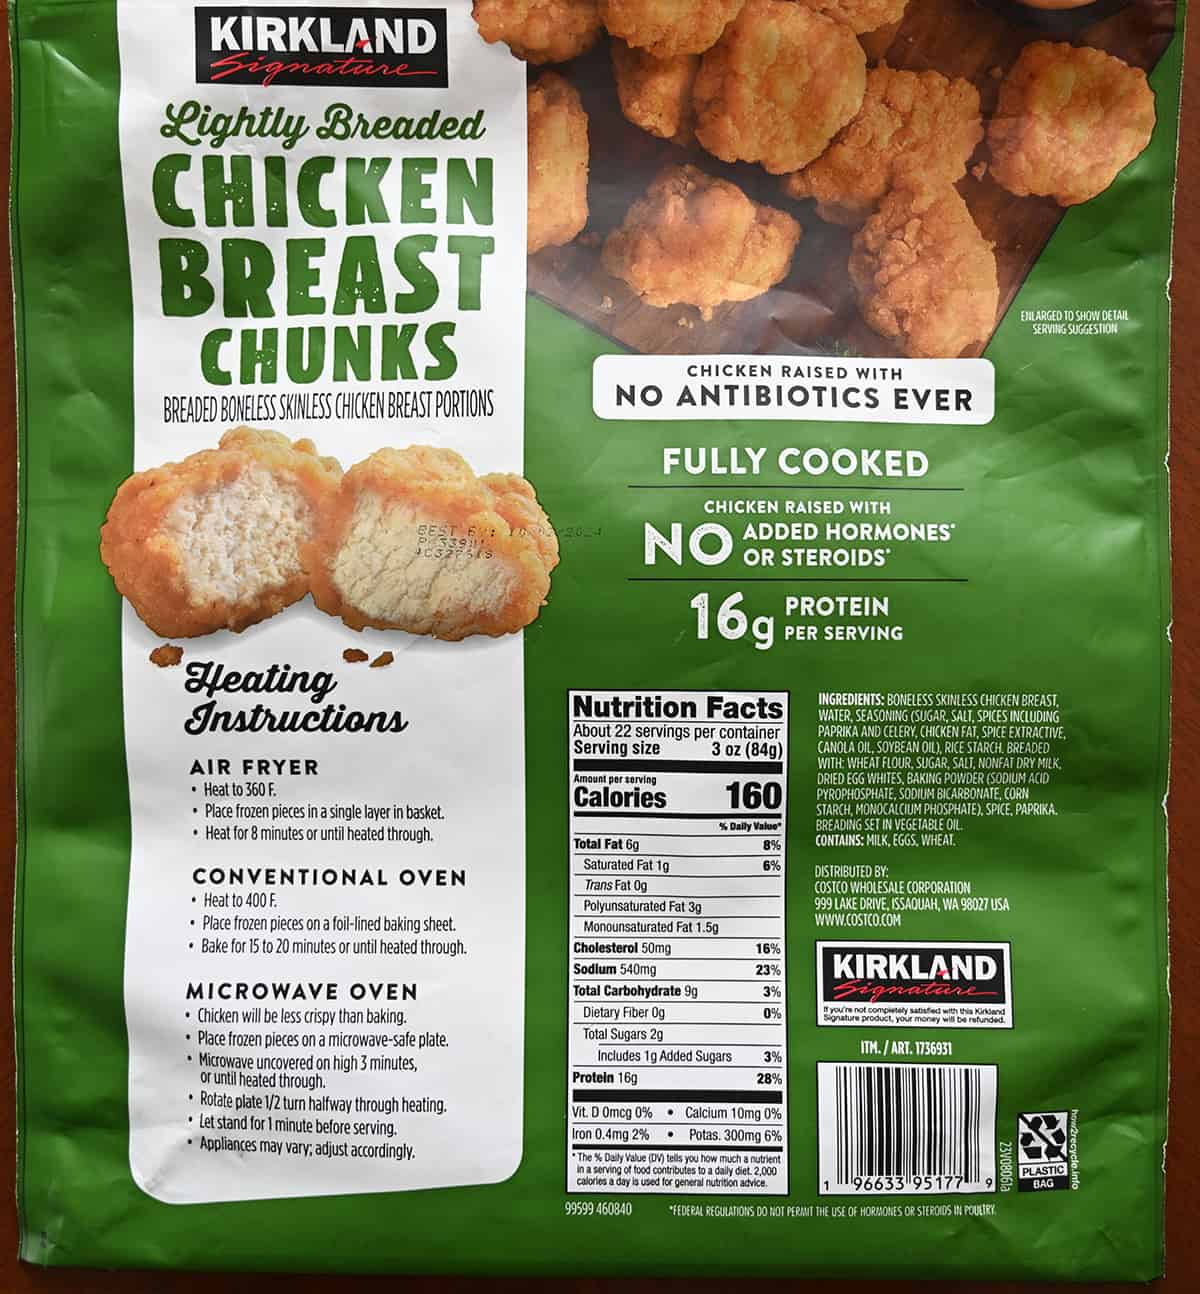 Image of the back of the bag of chicken breast chunks showing the ingredients, nutrition facts and heating instructions.